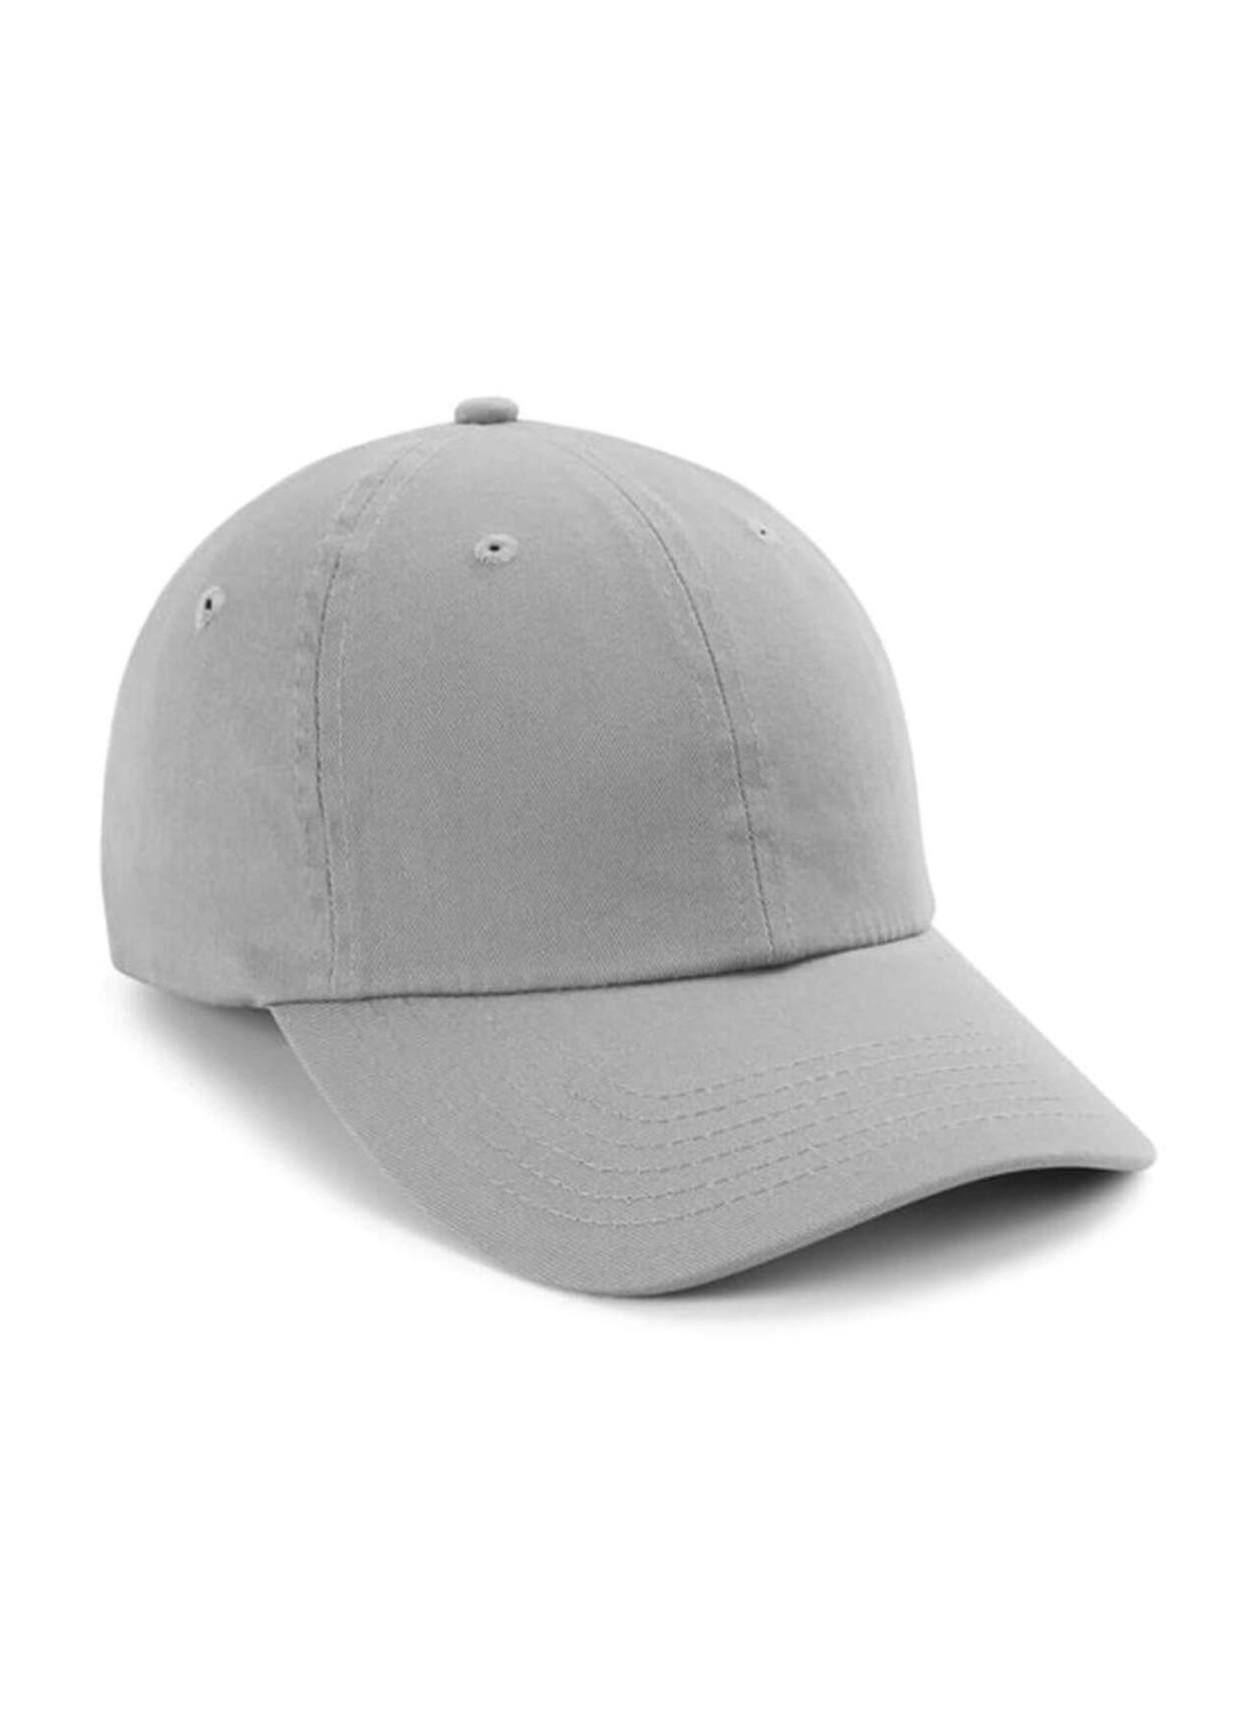 Imperial Light Grey The Original Buckle Hat